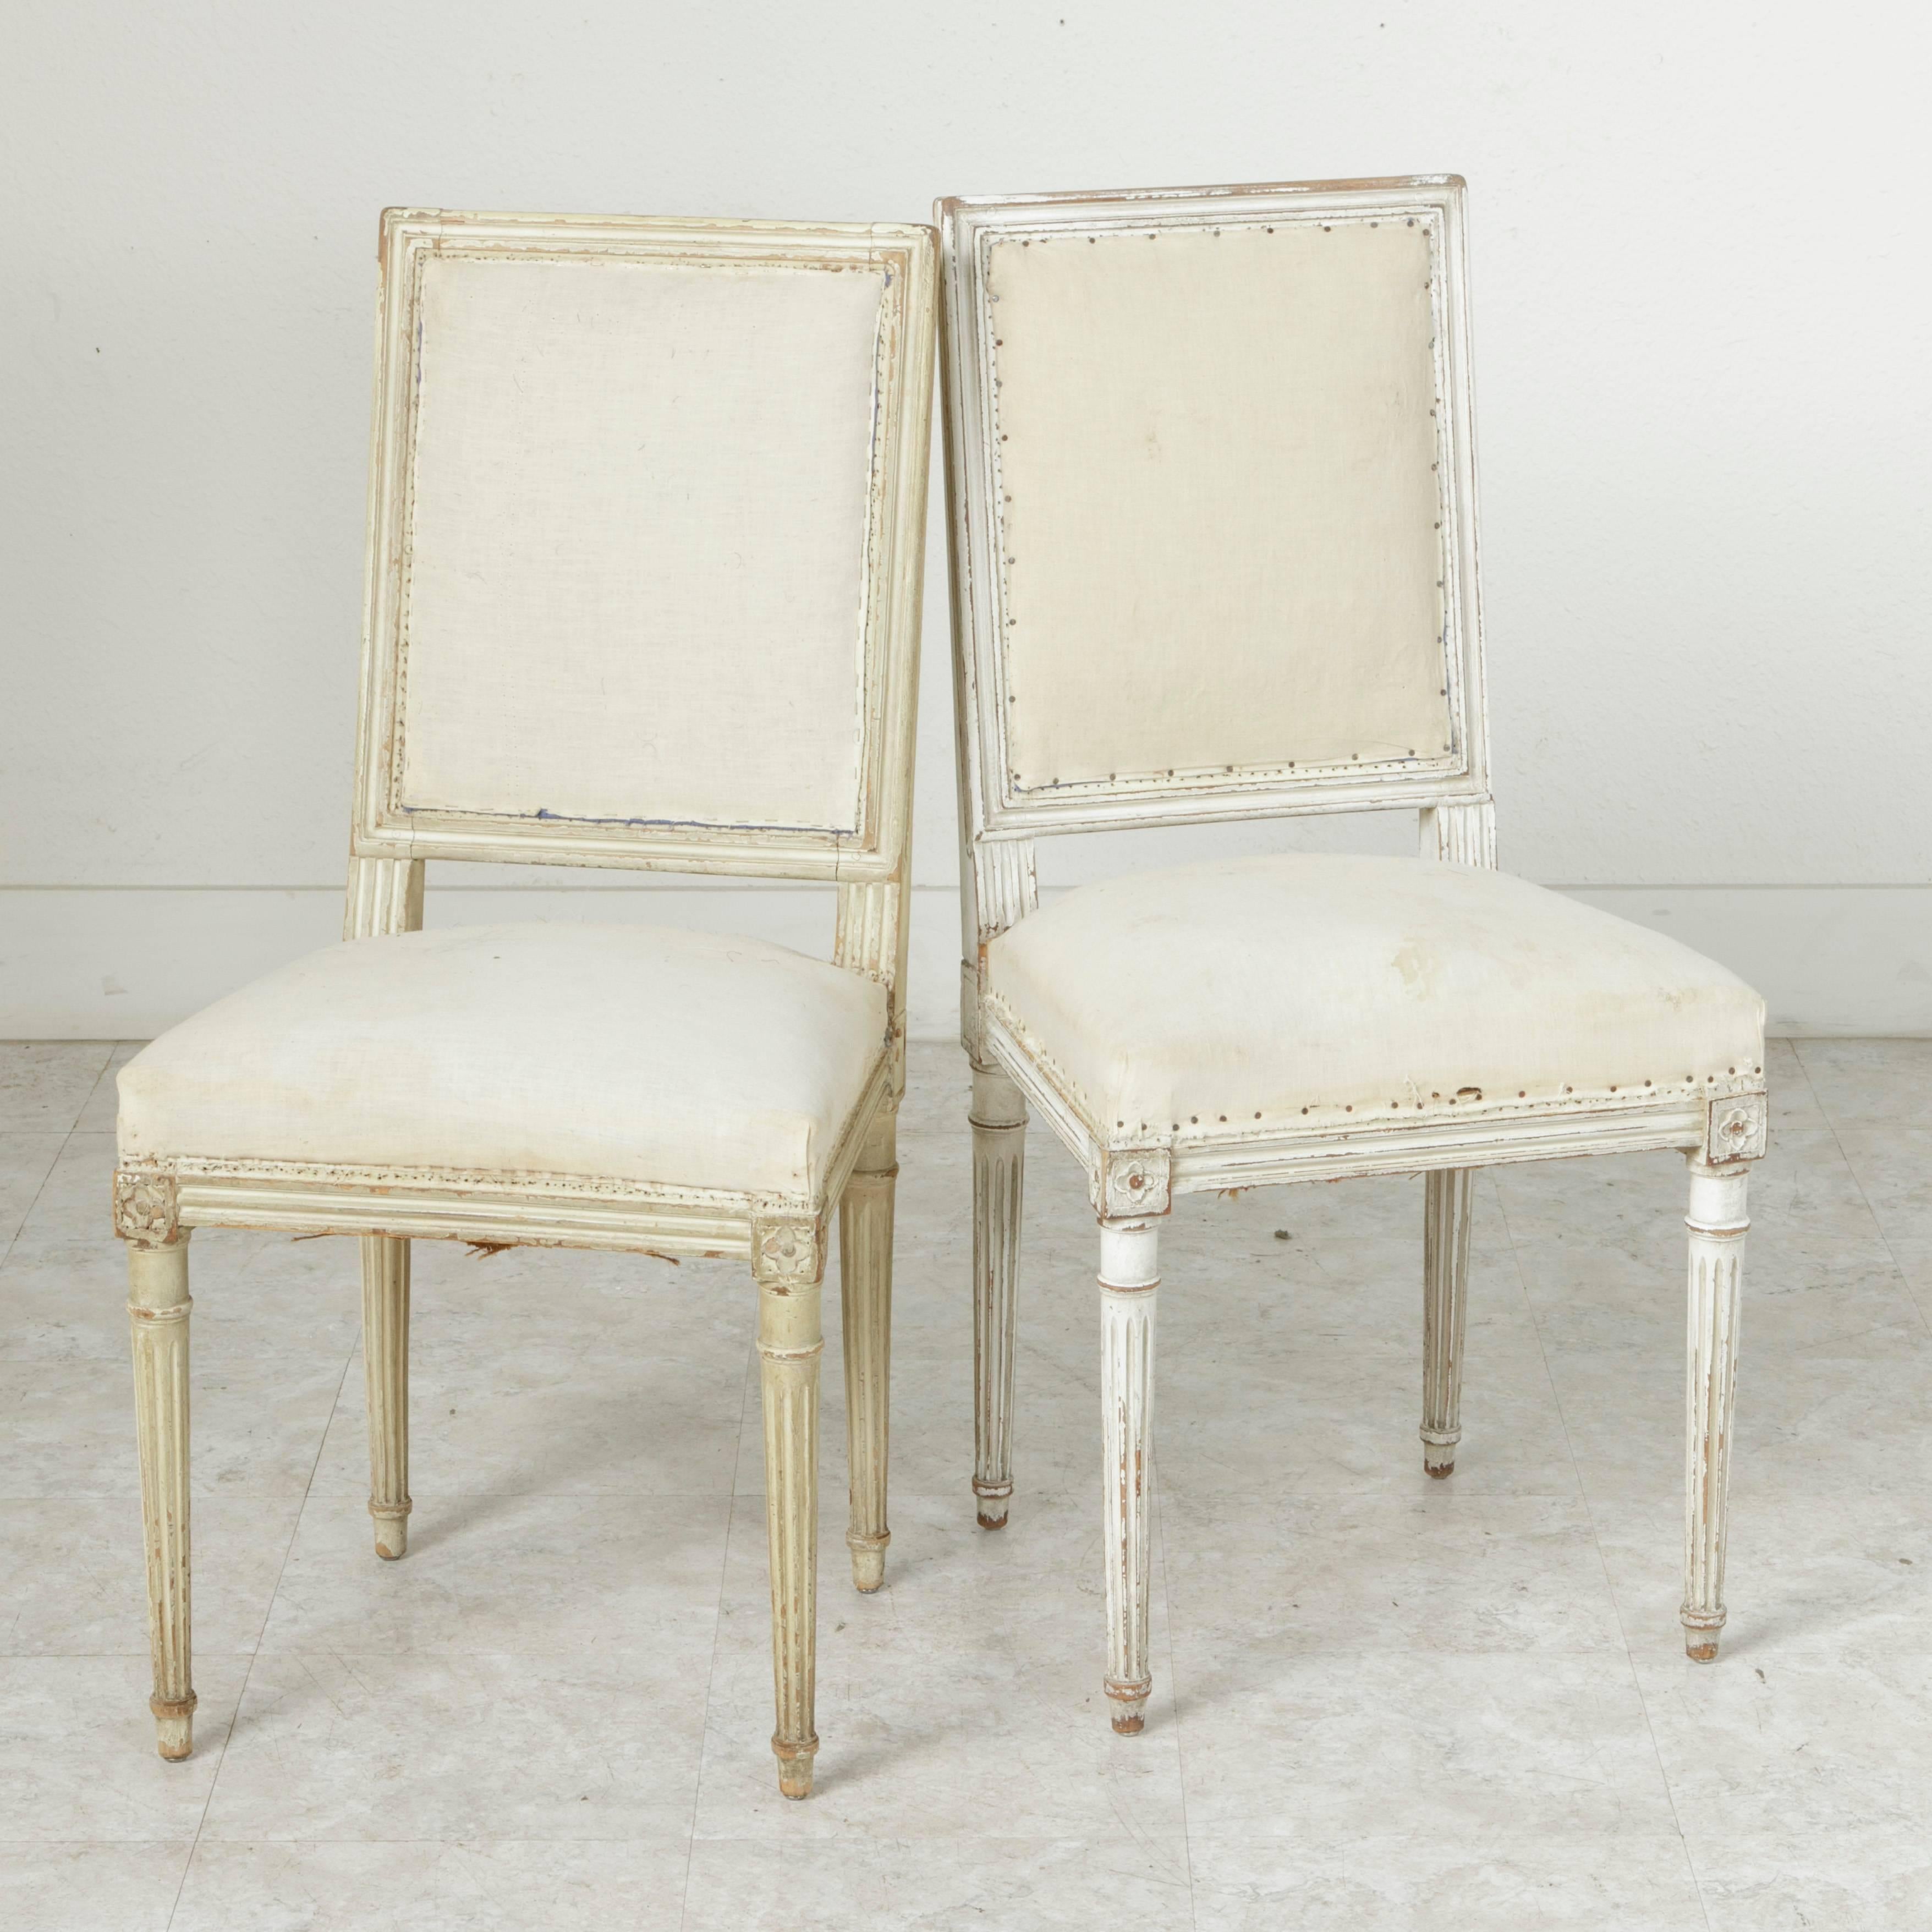 This set of four late 19th century hand-carved and white painted Louis XVI style side chairs of hand pegged construction features carved rosettes on the die joints and classic tapered fluted legs. The natural wear of the patina lends a weathered